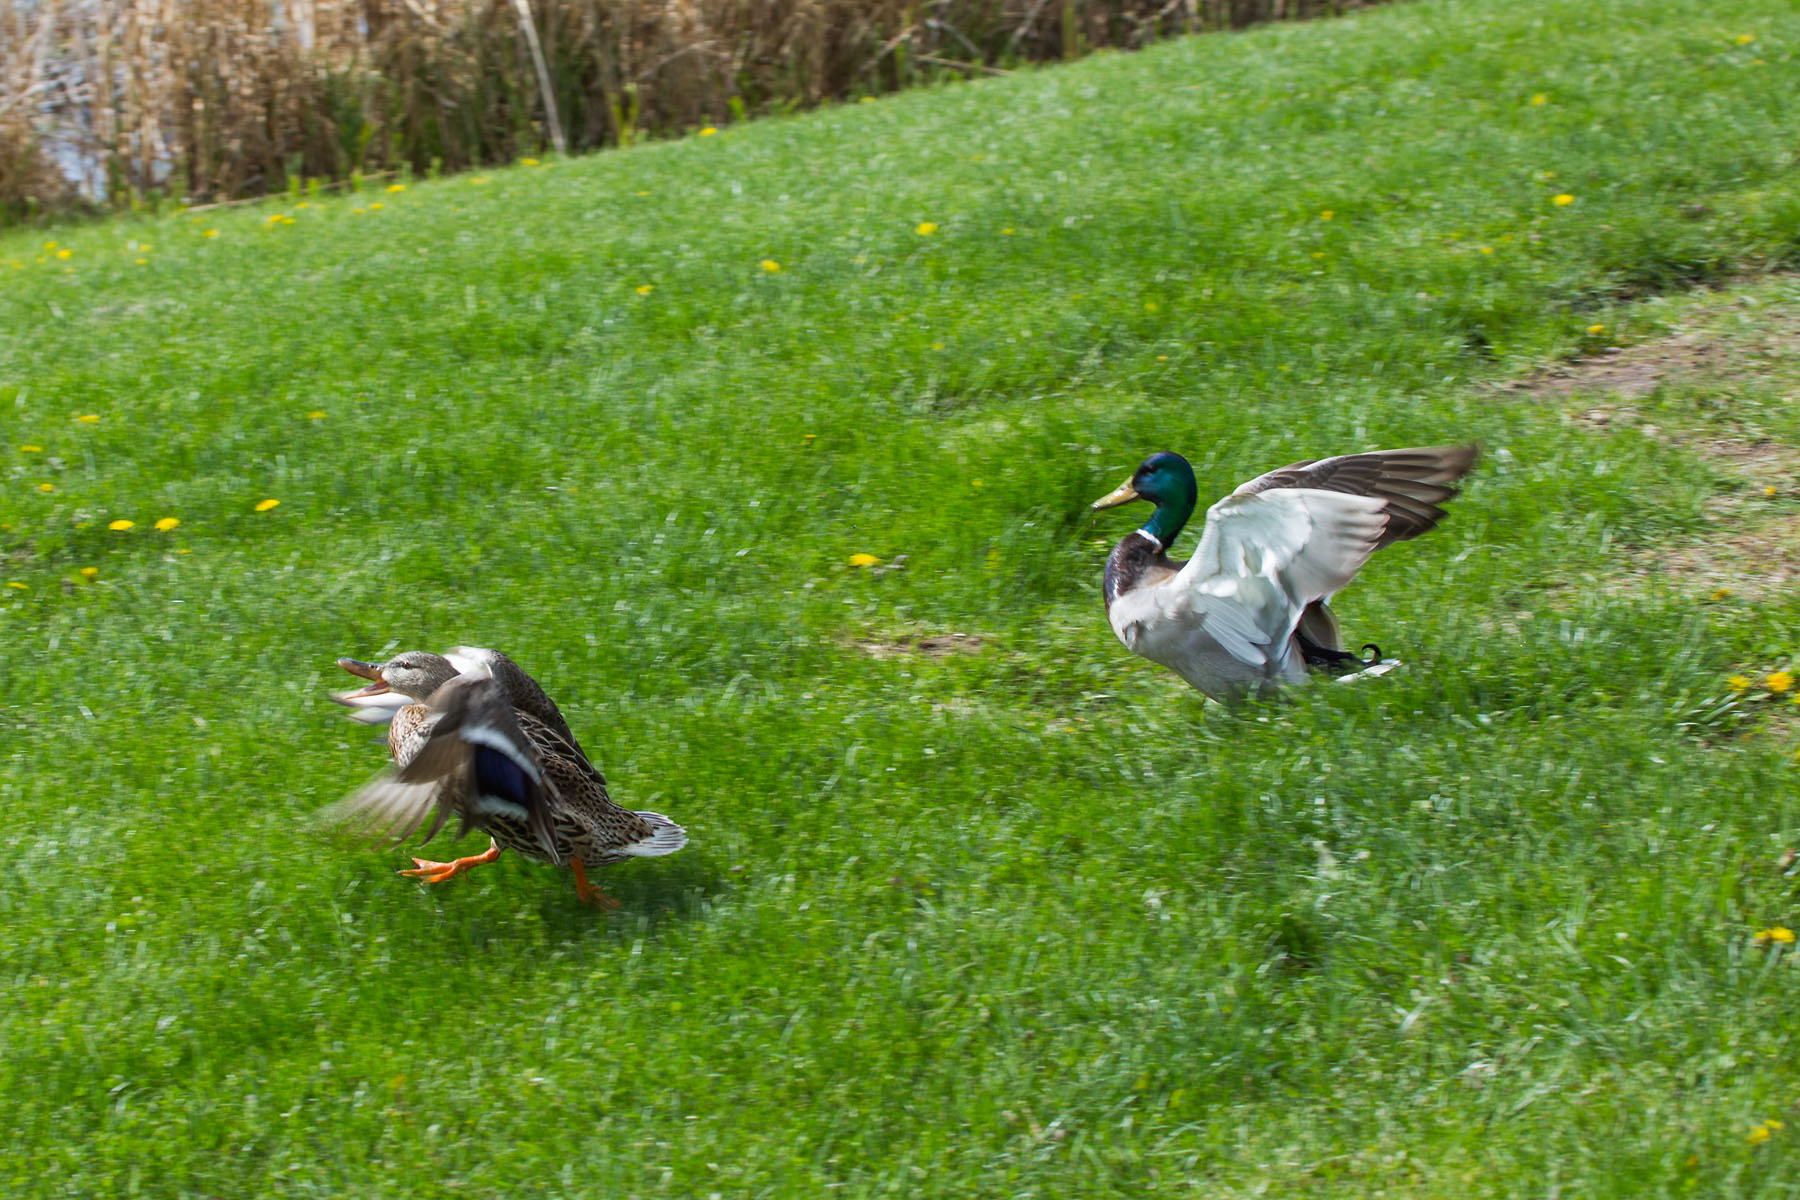 Ducks, Sioux Falls, SD.  The interloper gets the upper hand temporarily.  Click for next photo.